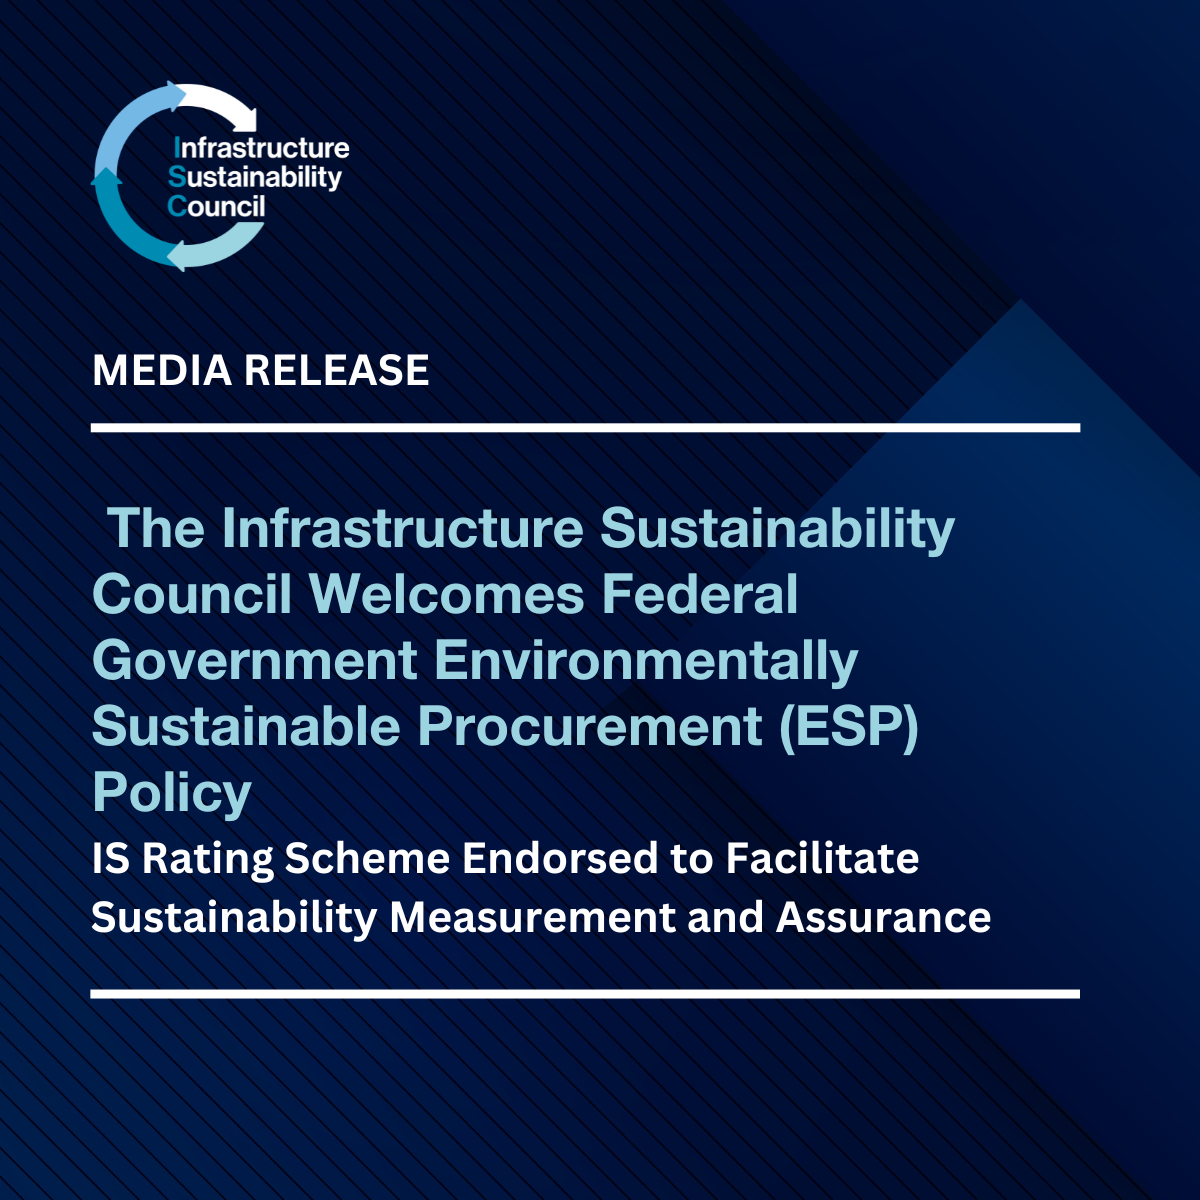 The Infrastructure Sustainability Council Welcomes Federal Government Environmentally Sustainable Procurement (ESP) Policy